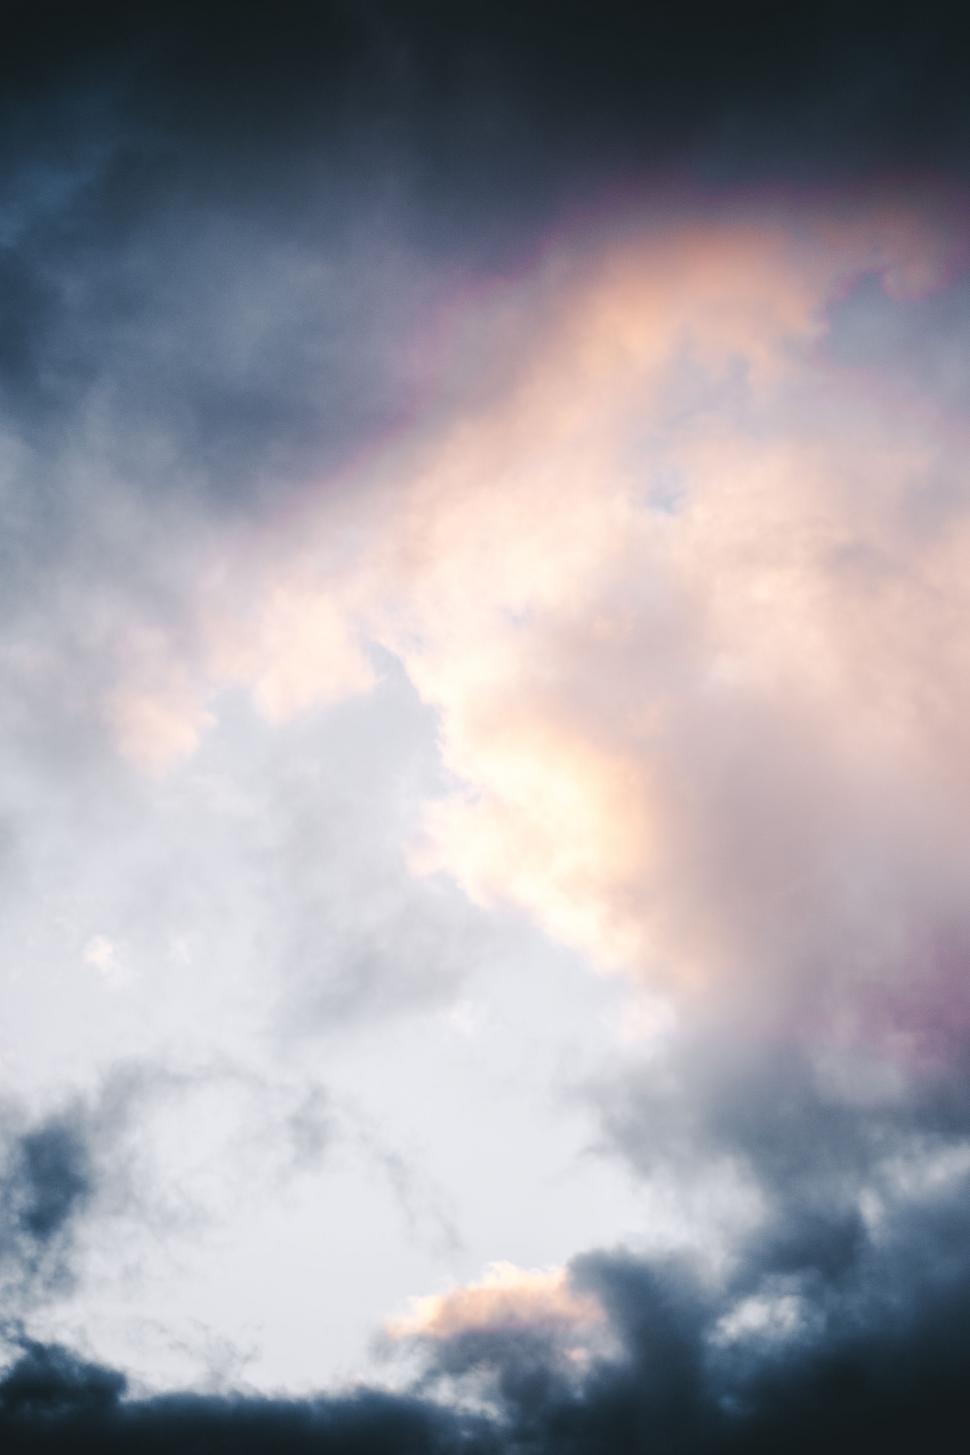 Free Image of A Plane Flying Through a Cloudy Sky 